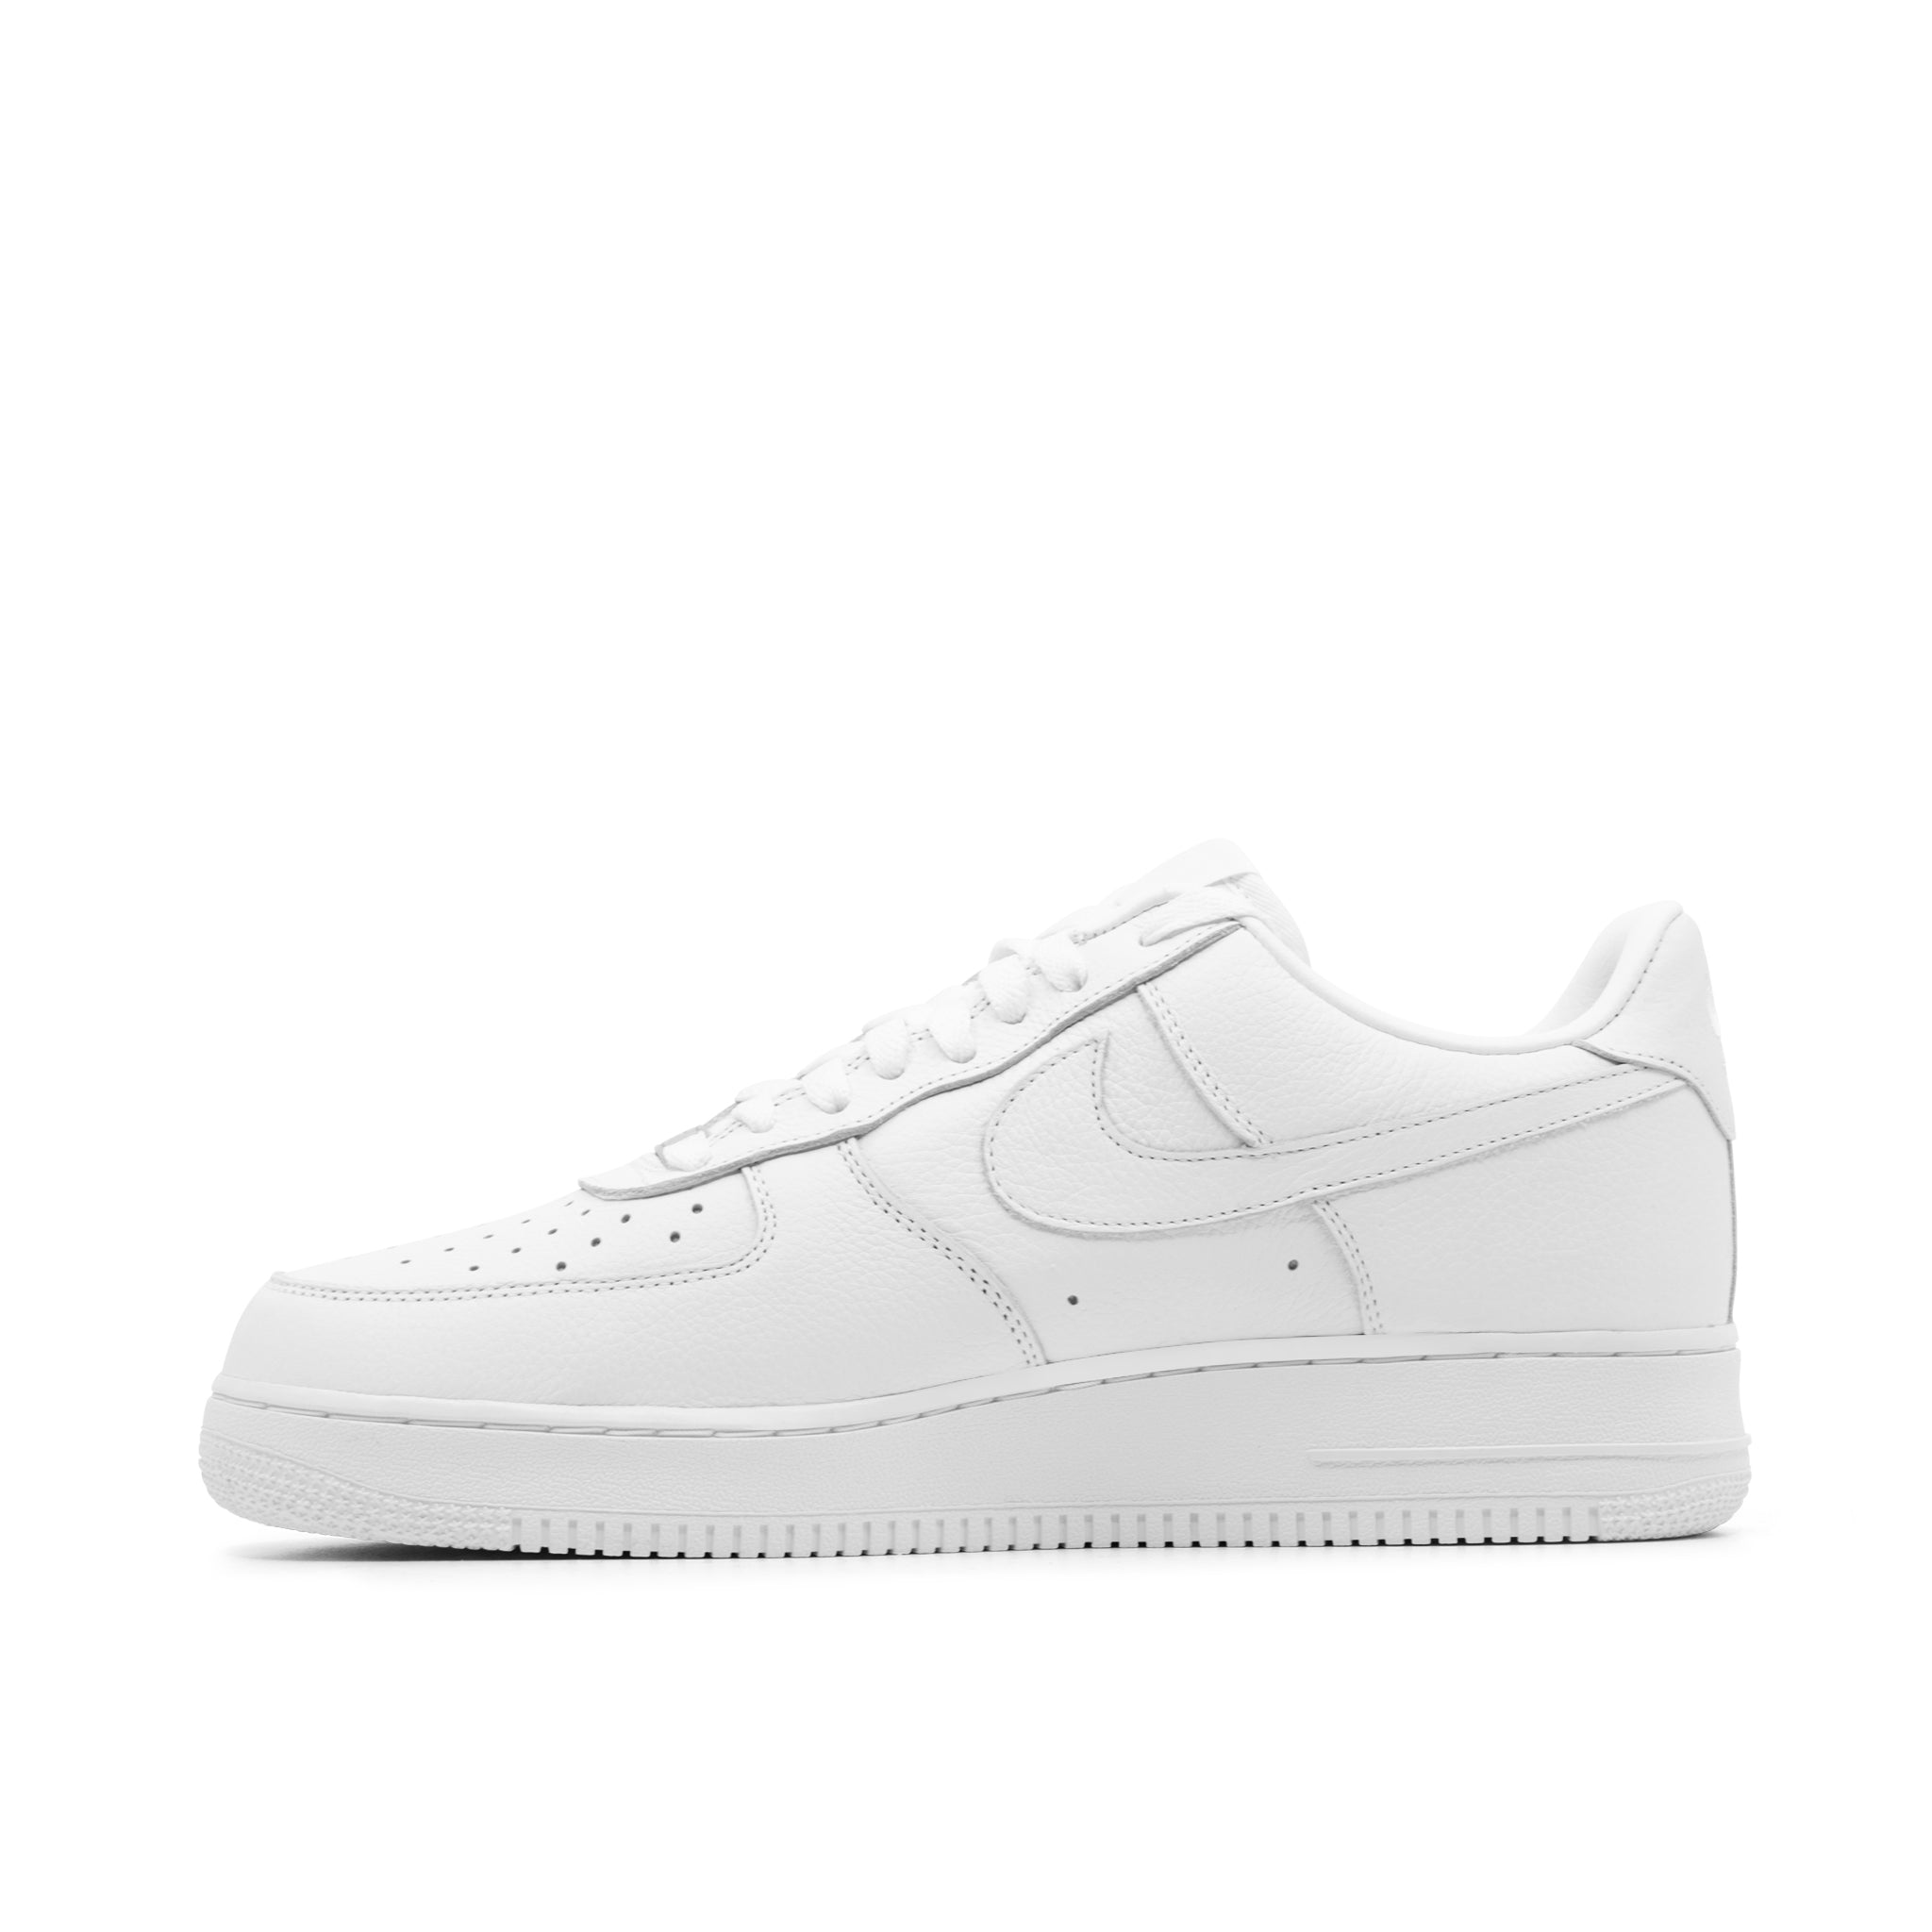 NIKE AIR FORCE 1 LOW CPFM WHITE